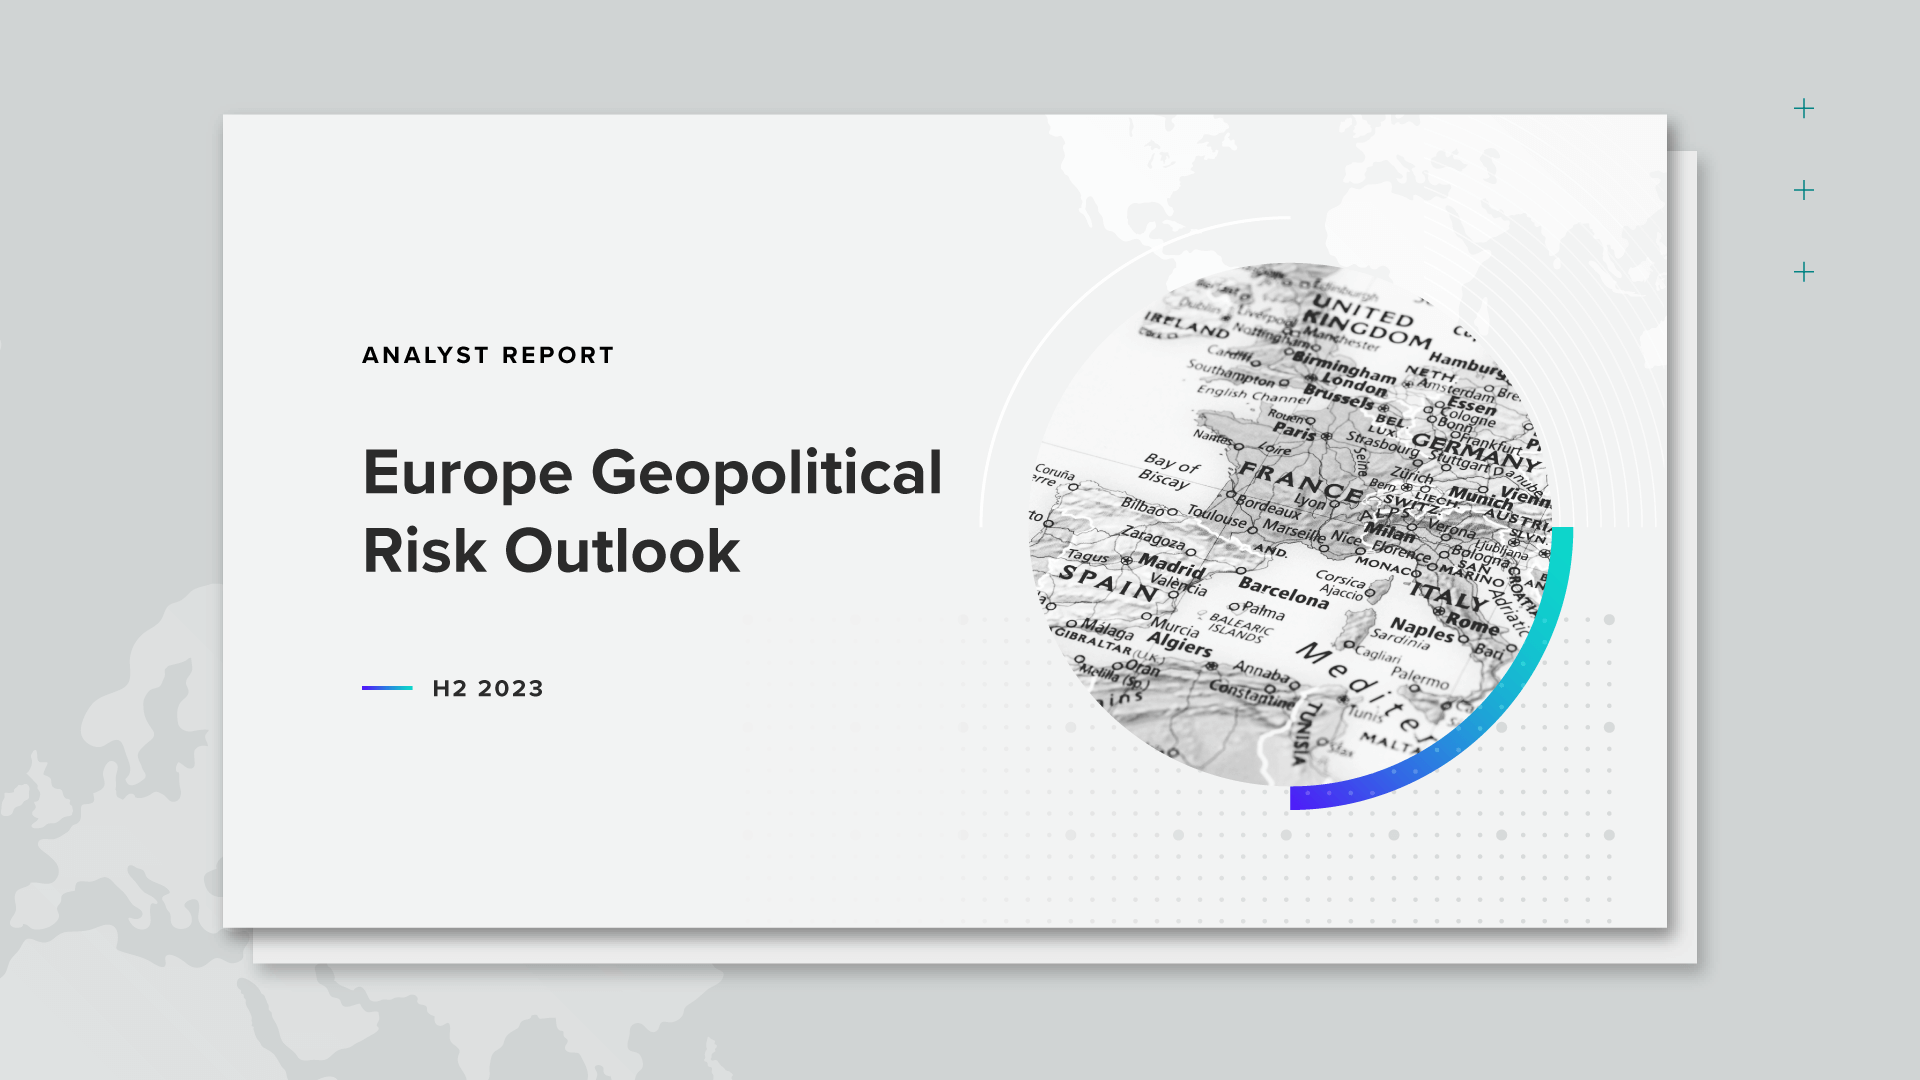 Download the Europe Geopolitical Risk Outlook: H2 2023 Report